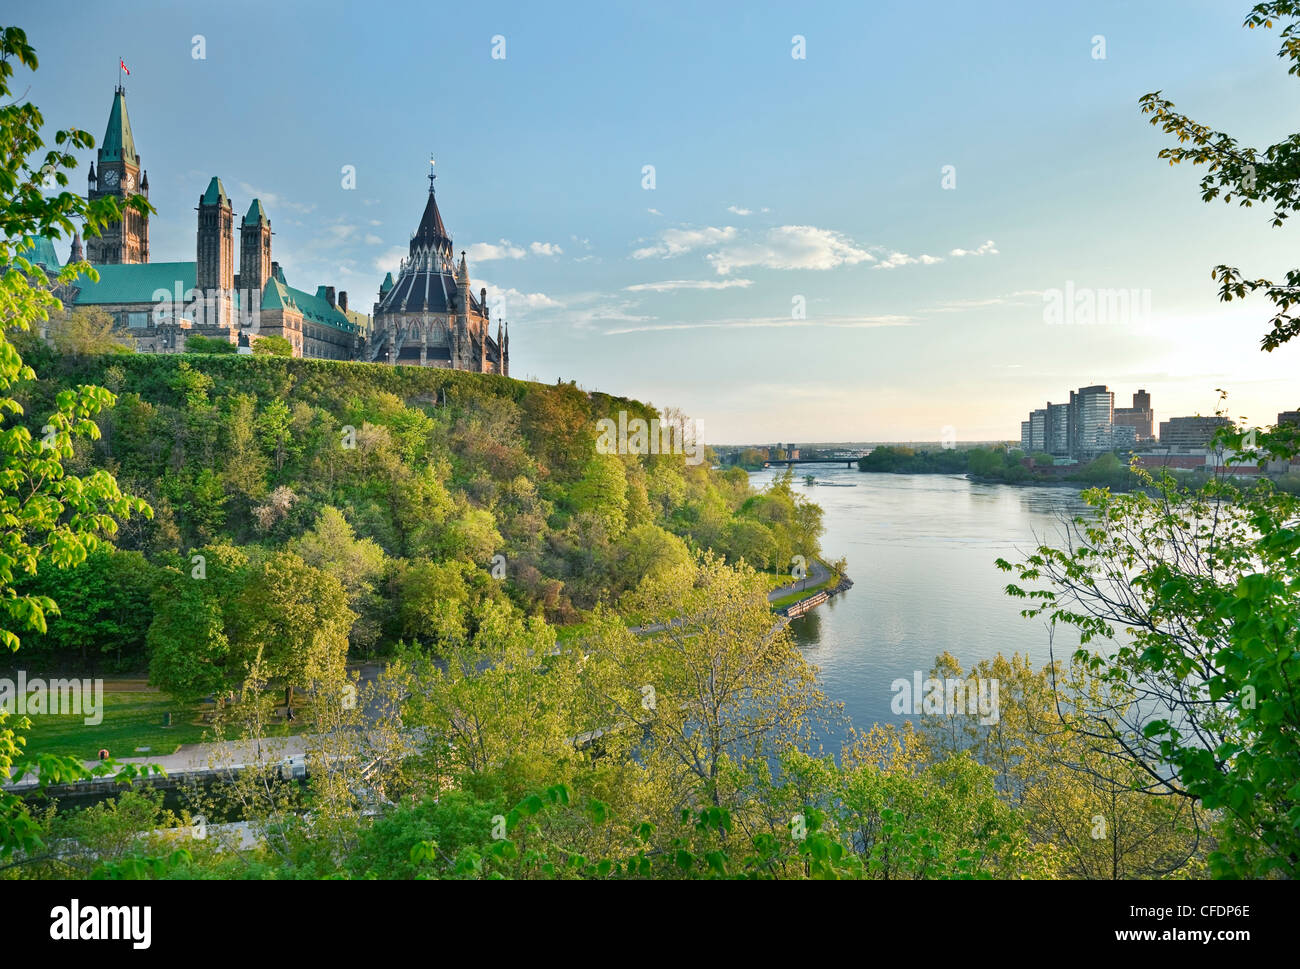 Canada's House of Parliament on Parliament Hill, overlooking the Ottawa River in Ottawa, Ontario, Canada Stock Photo